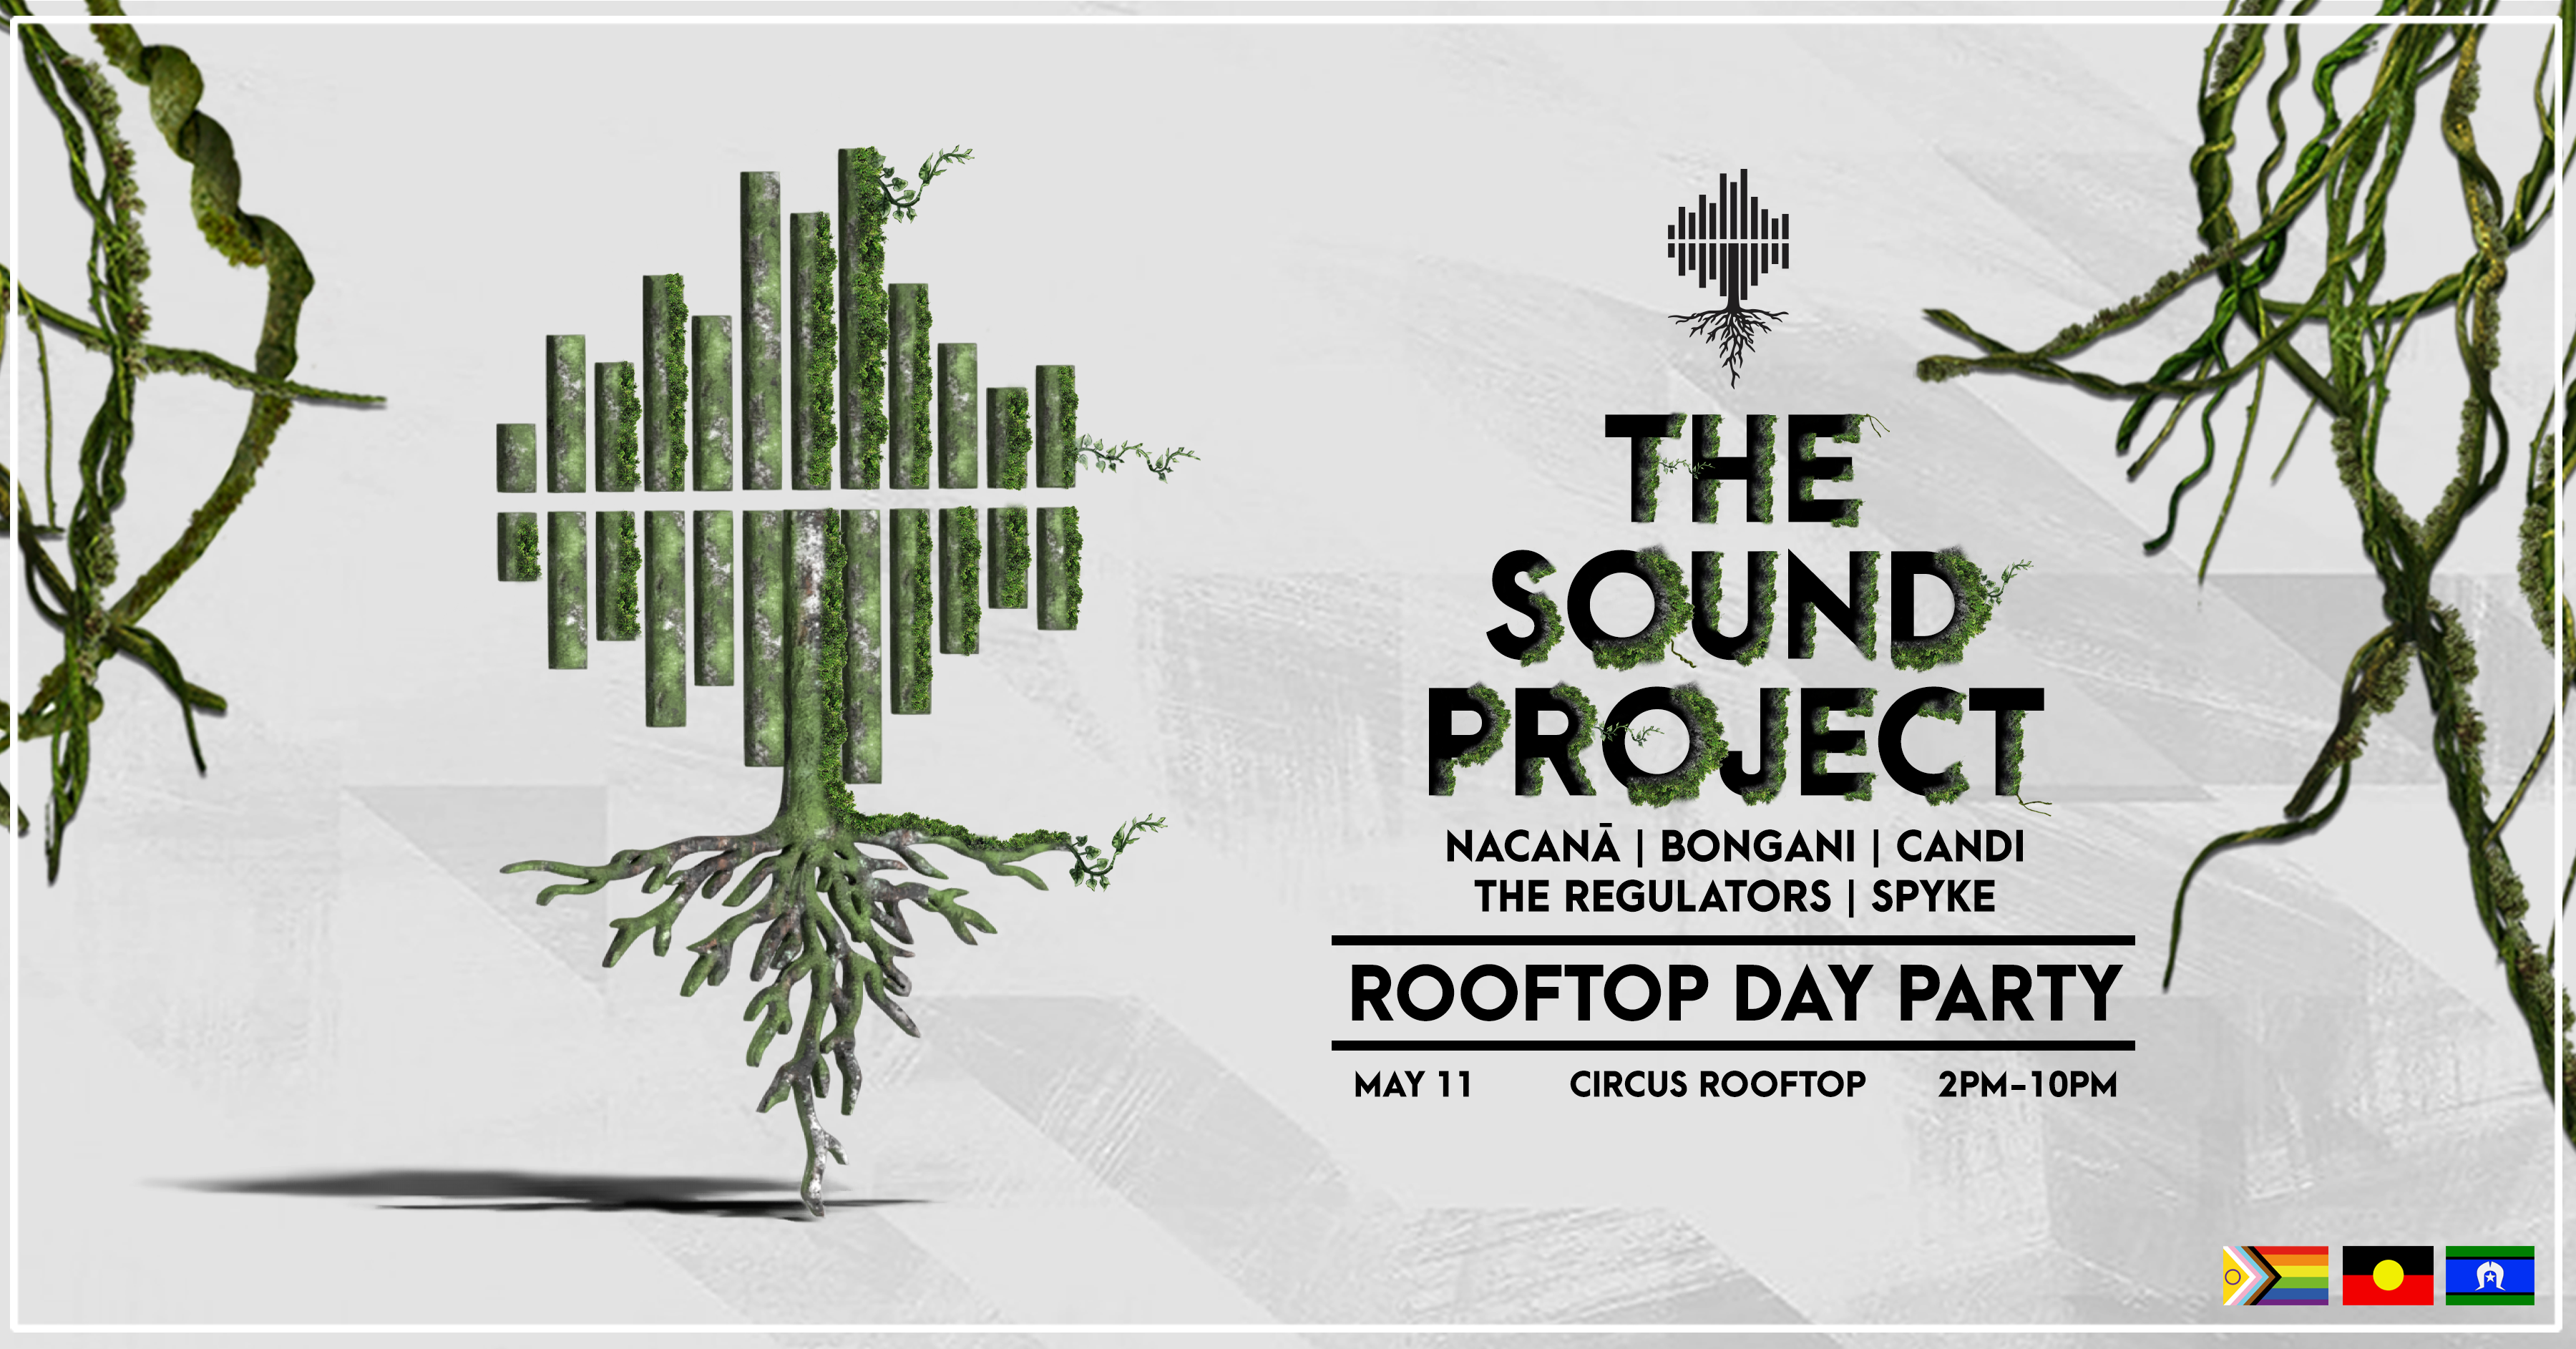 The Sound Project - Rooftop Day Party - Página frontal